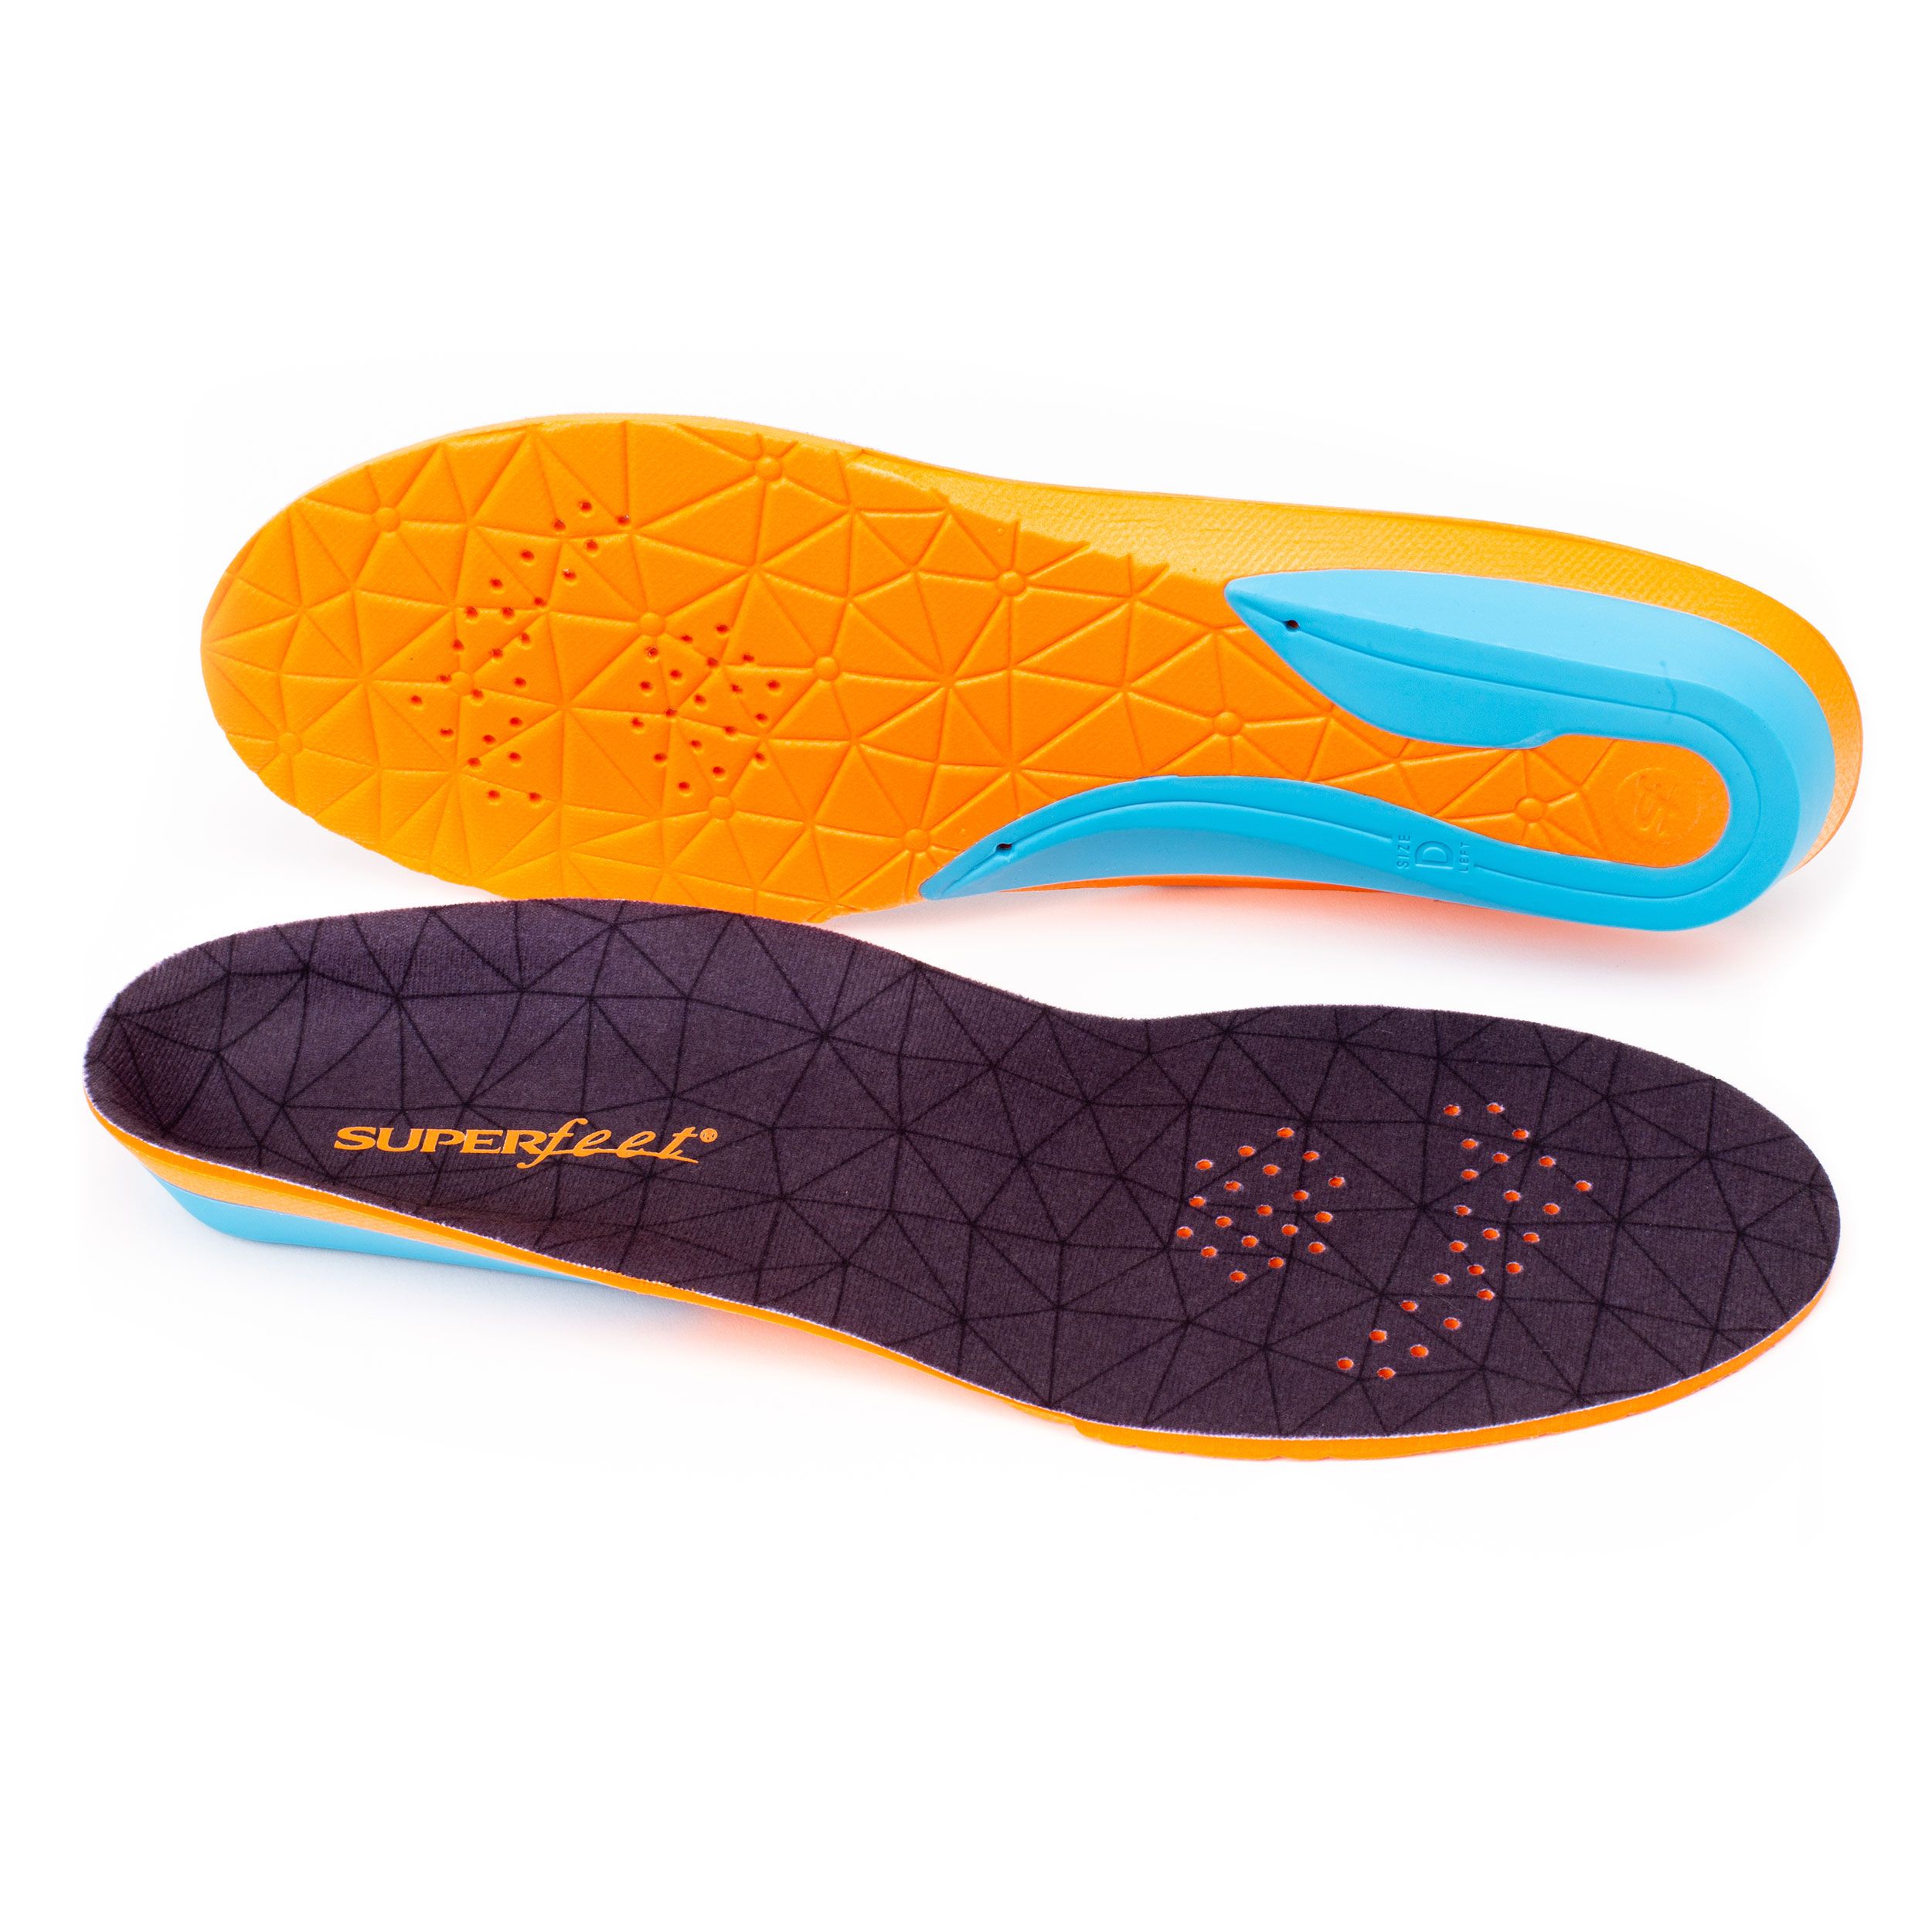 Superfeet All-Purpose Cushion Insoles - Trim-To-Fit Medium Arch Support Comfort Foam Inserts for Workout Shoes - Professional Grade - Men 5.5-7 / Women 6.5-8 - image 1 of 6